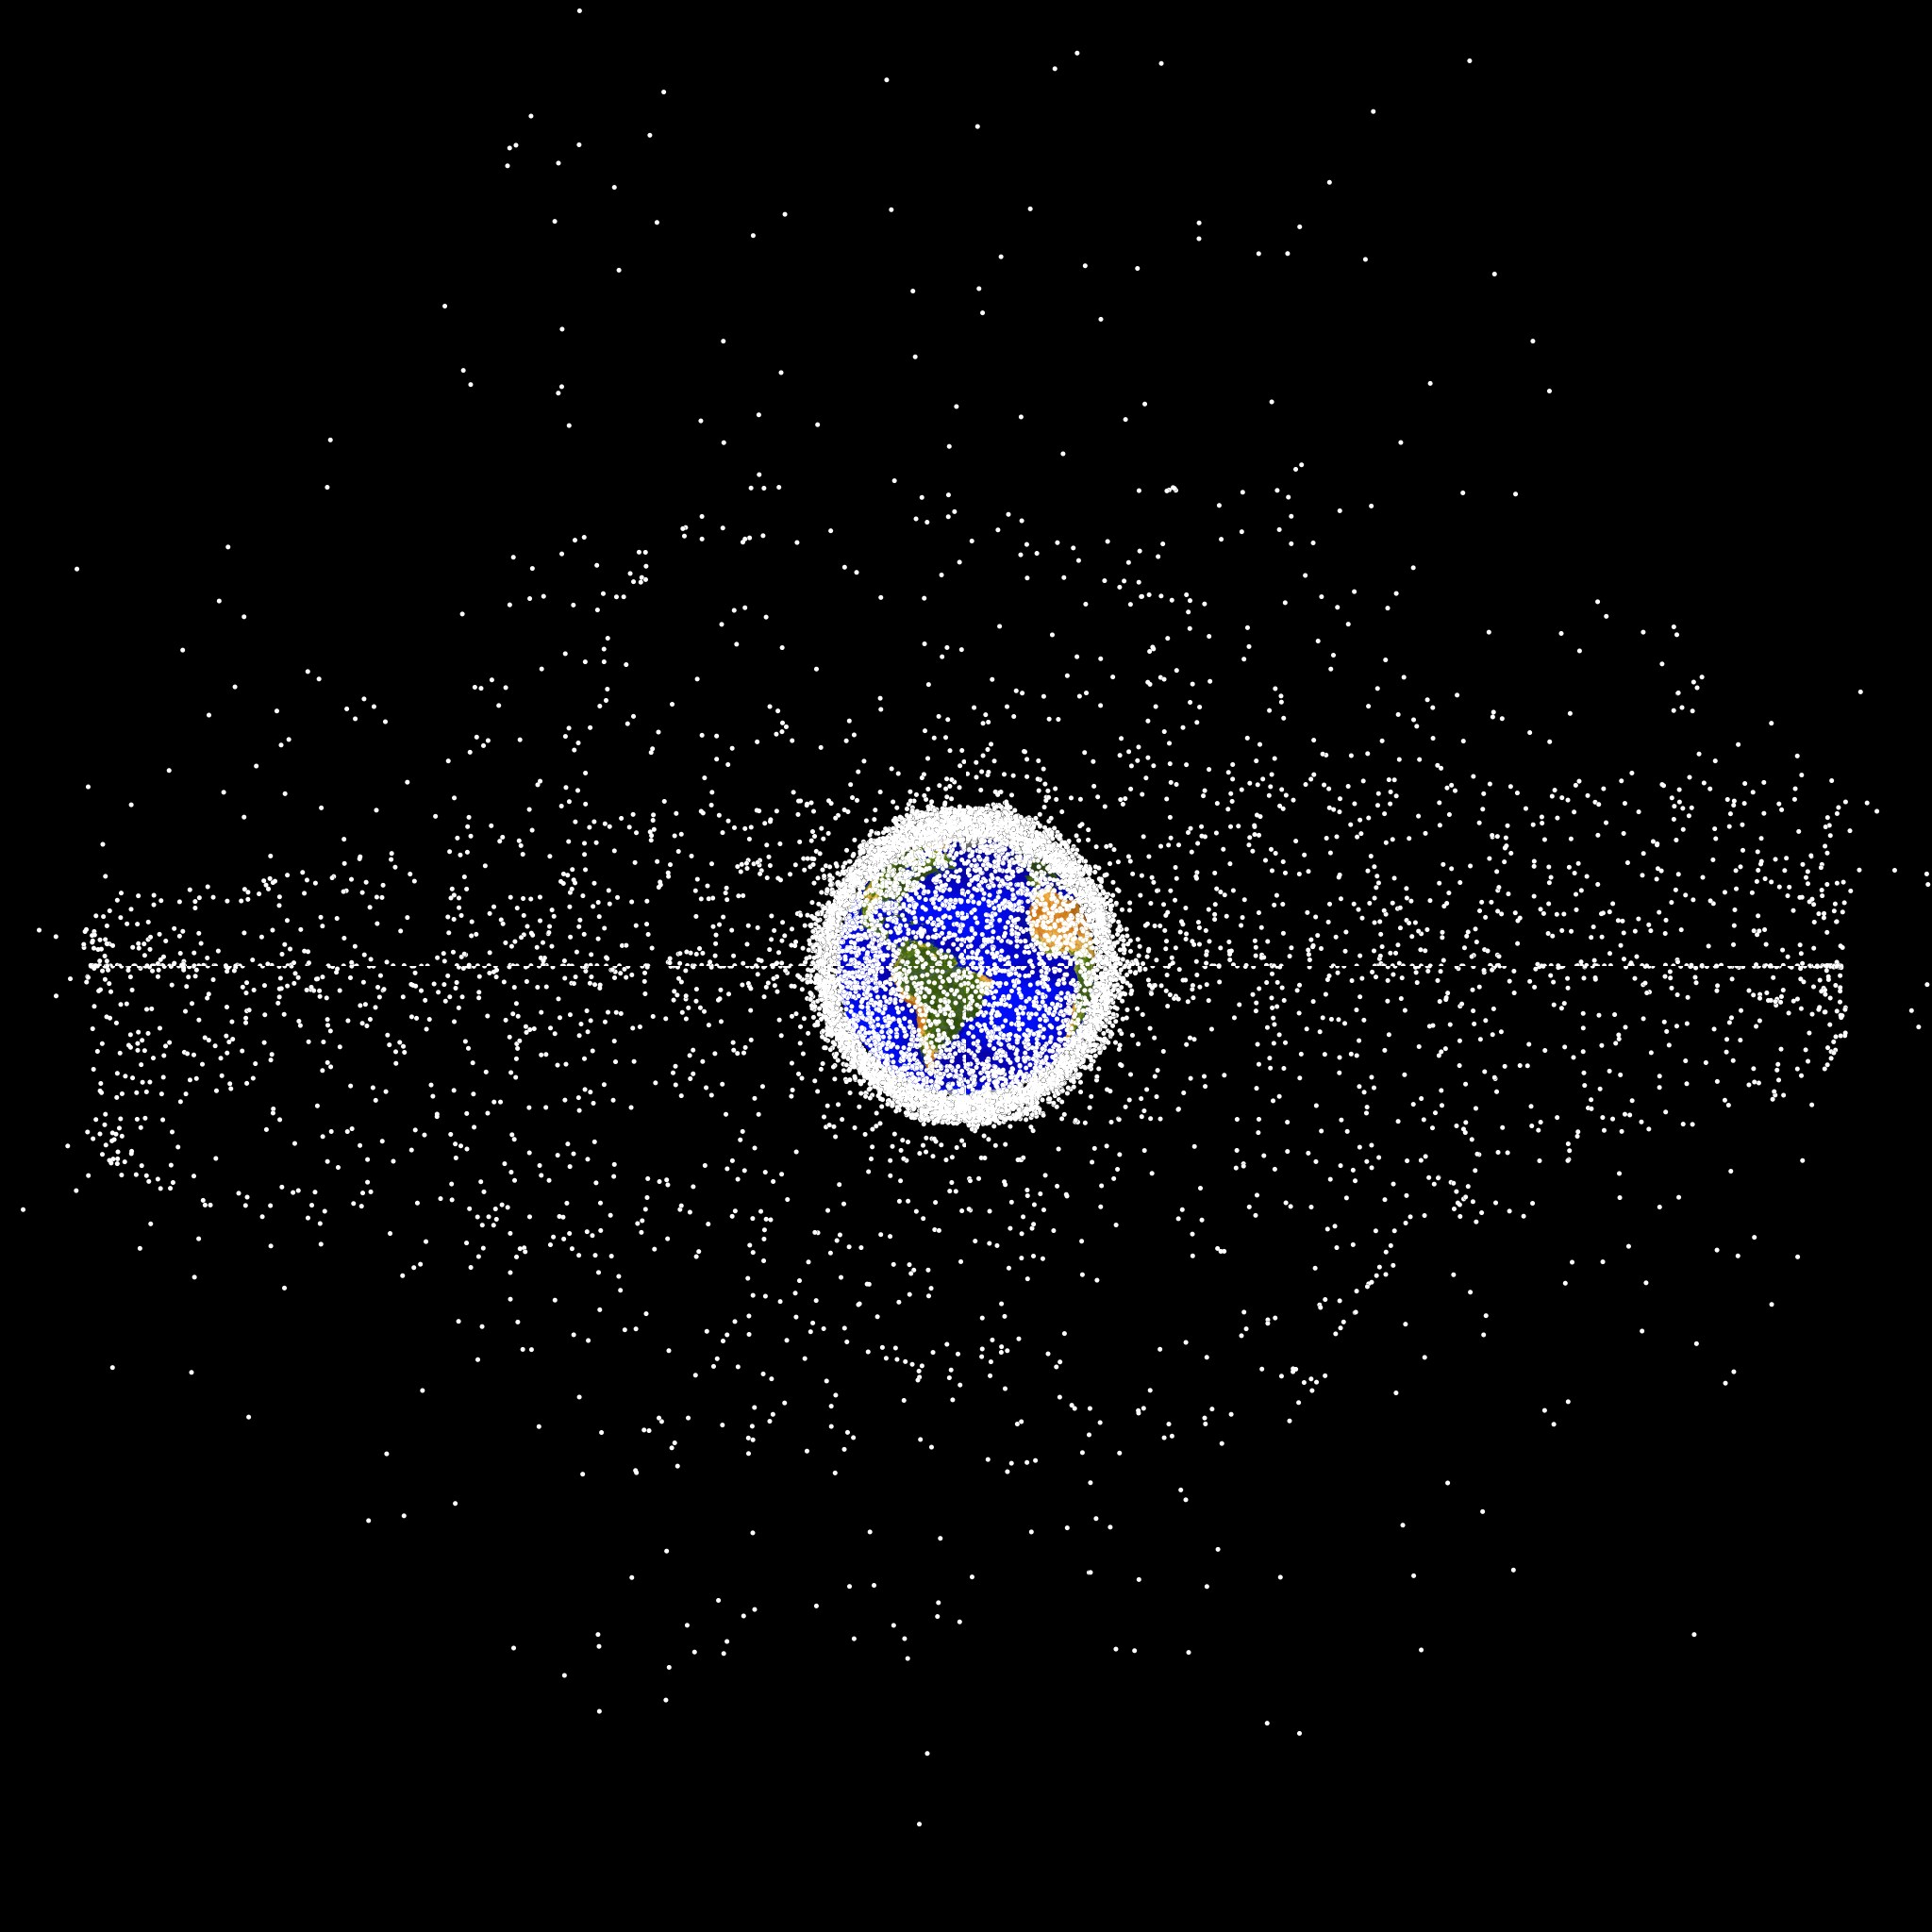 Simulation of orbital debris around Earth demonstrating the object population in the geosynchronous region. 